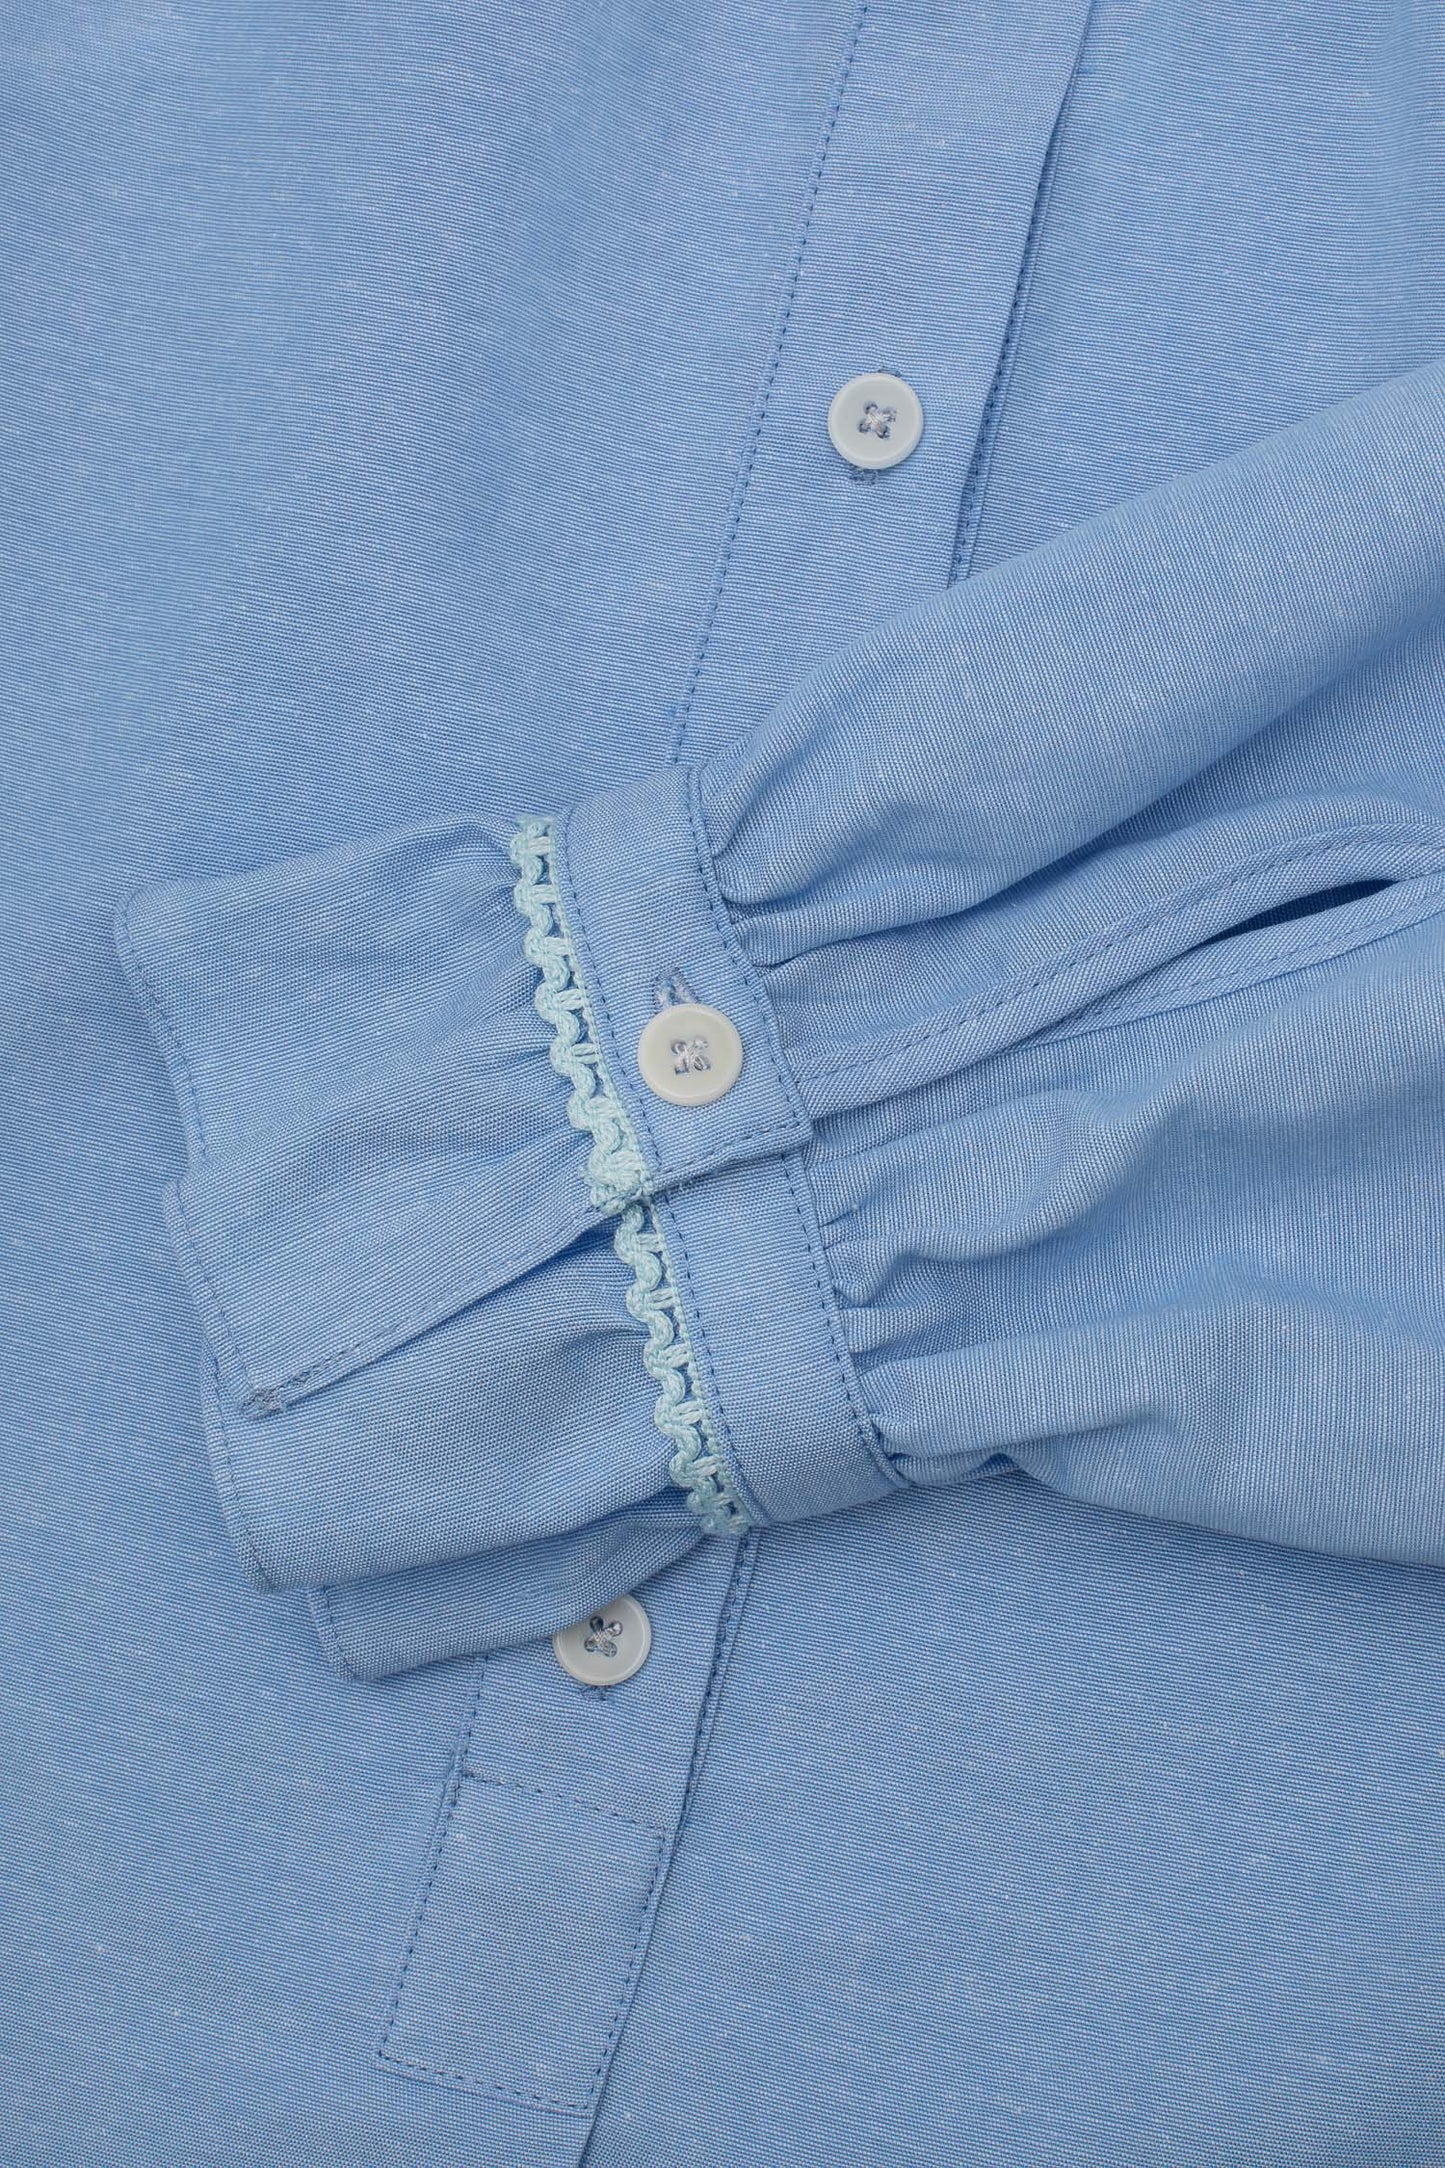 Womens Pale Blue Blouse, A-line shape with Gathered Neck and Frill cuffs. Marie Blouse by Saywood in pale blue recycled cotton. Close up of gathered cuff with lace trim.